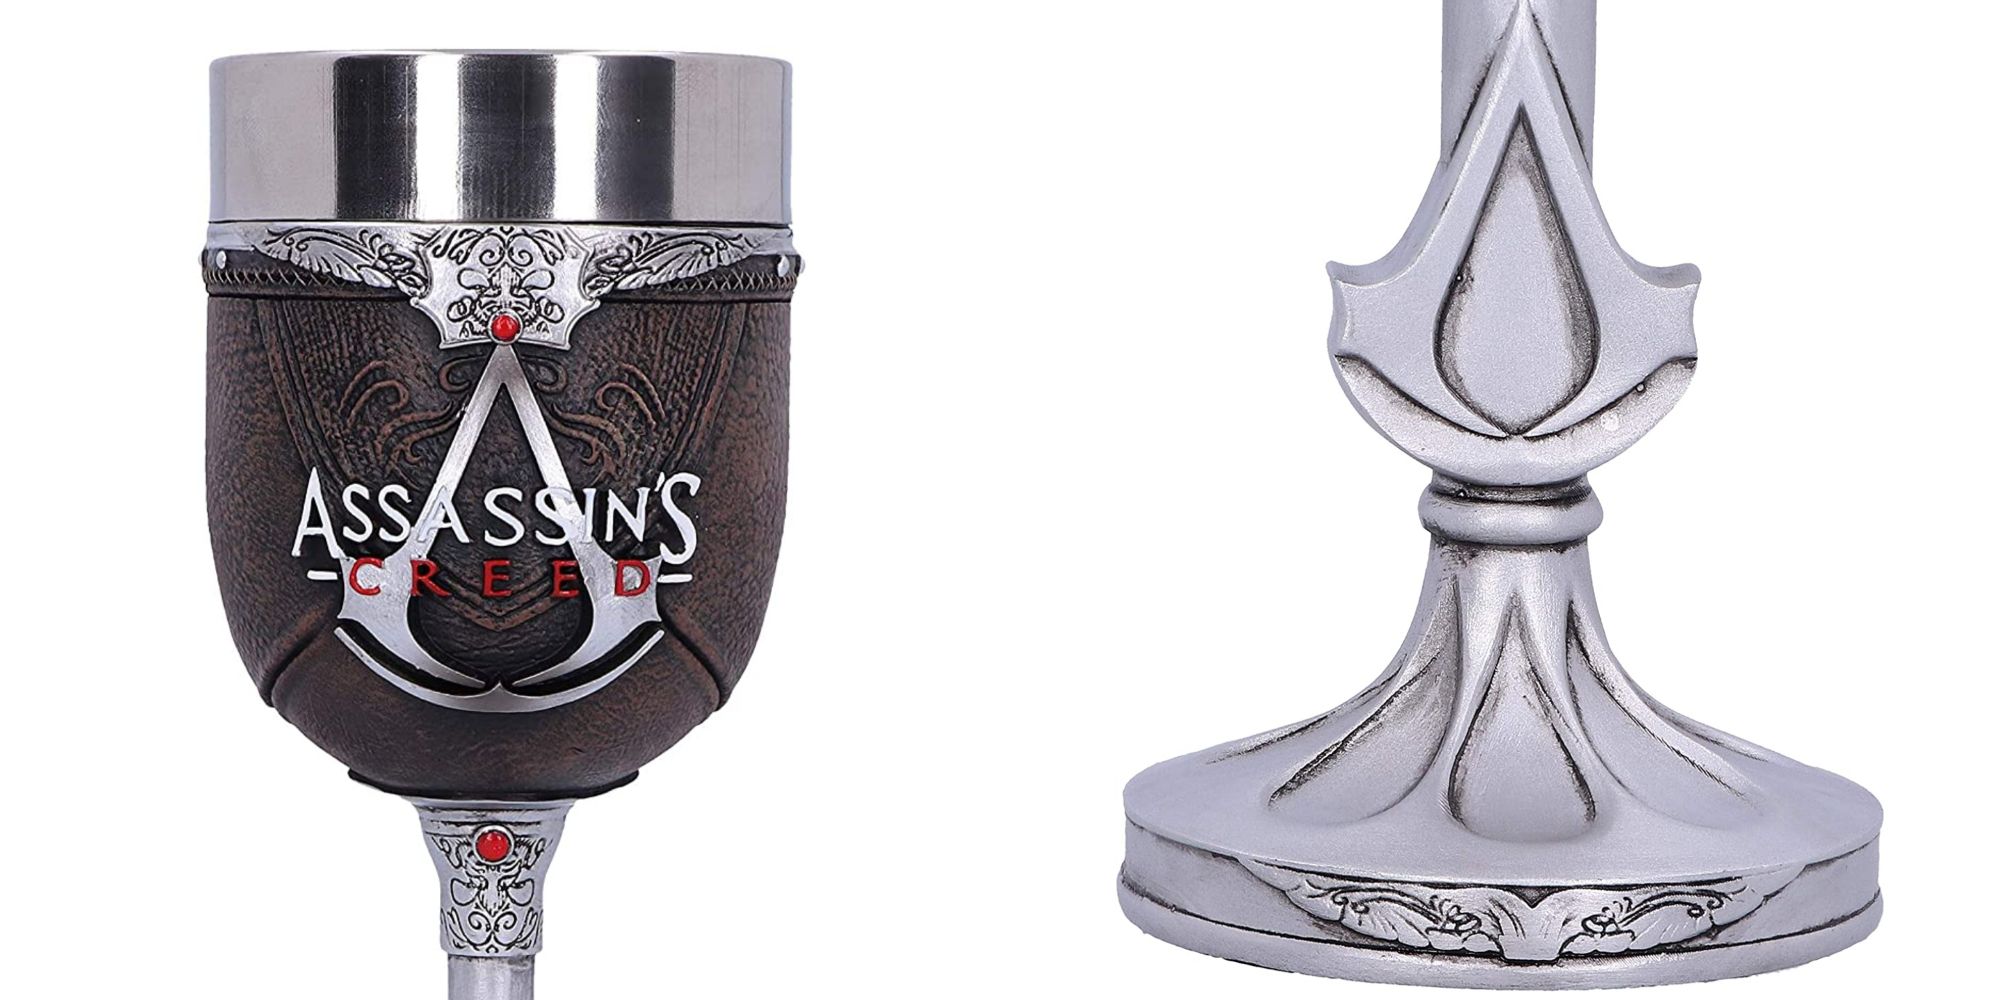 Assassin's Creed Goblet Top and Base